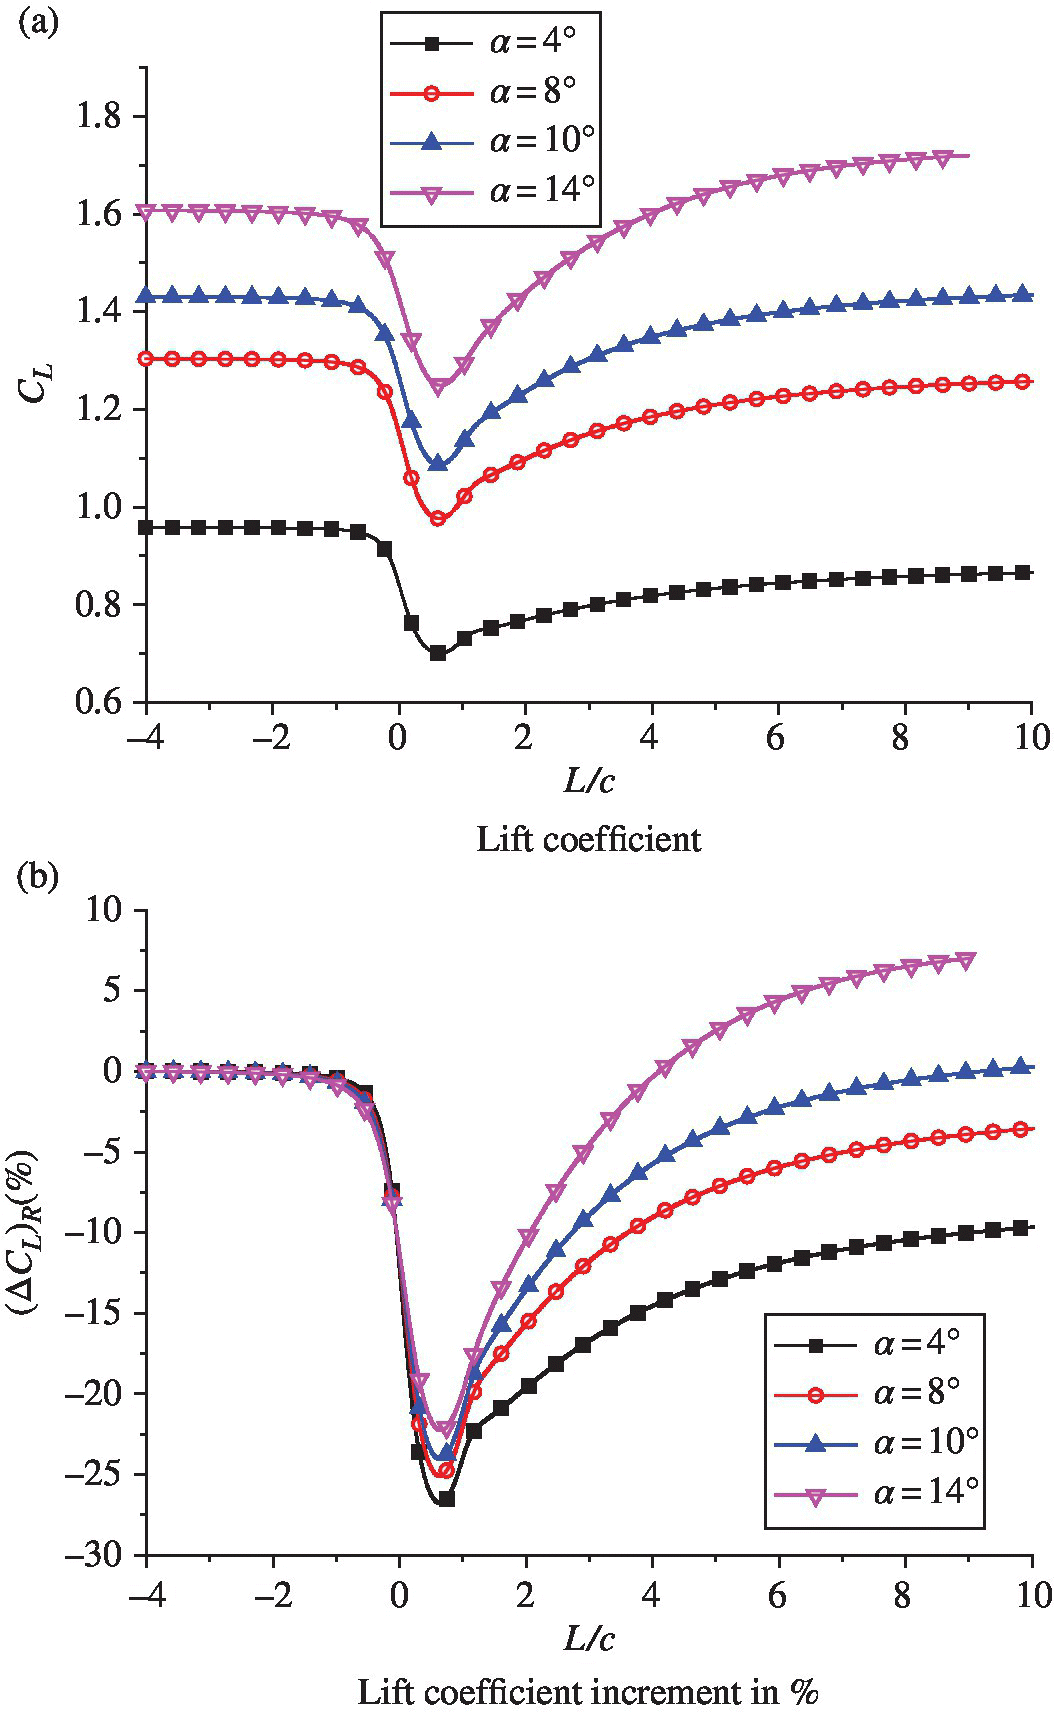 Two graphs illustrating the lift history curves of NACA4412 during take‐off for different AOAs with markers depicting  α=4° (square), α=8° (circle), α= 10° (triangle), and α= 14° (inverted triangle).